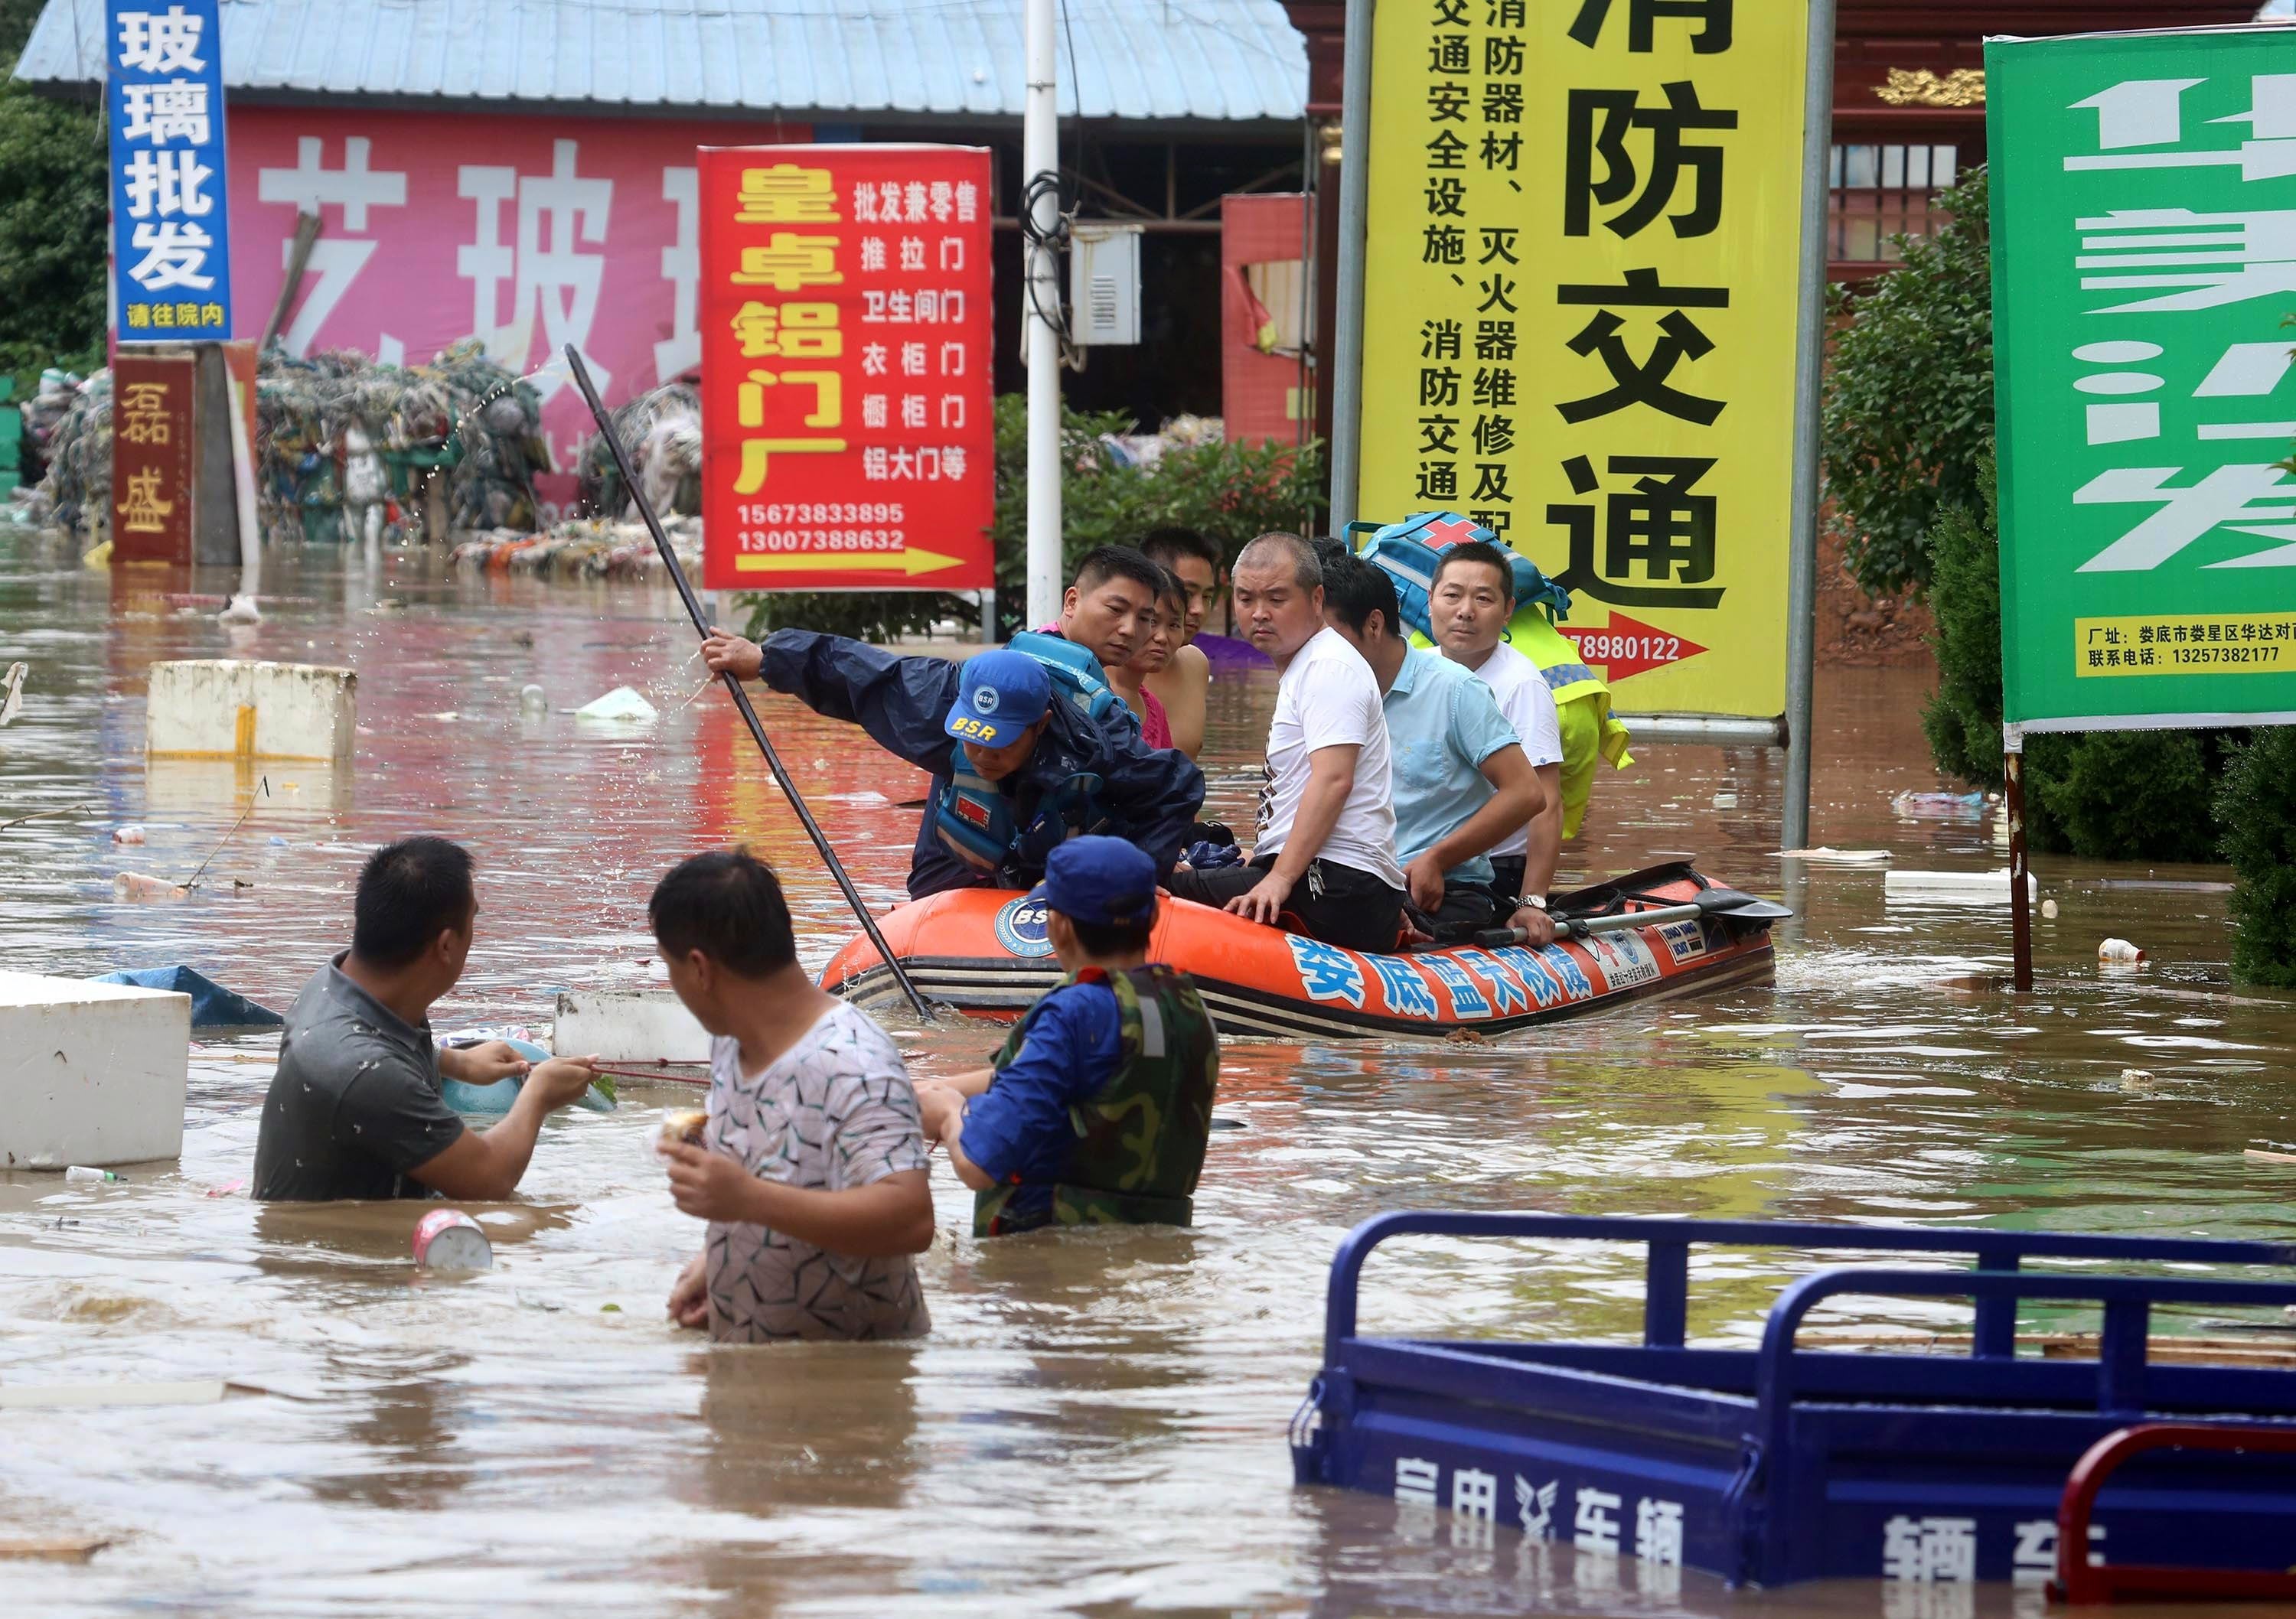 Eleven provinces badly affected, with economic losses reaching over US$3.7b, and more rain is on the way